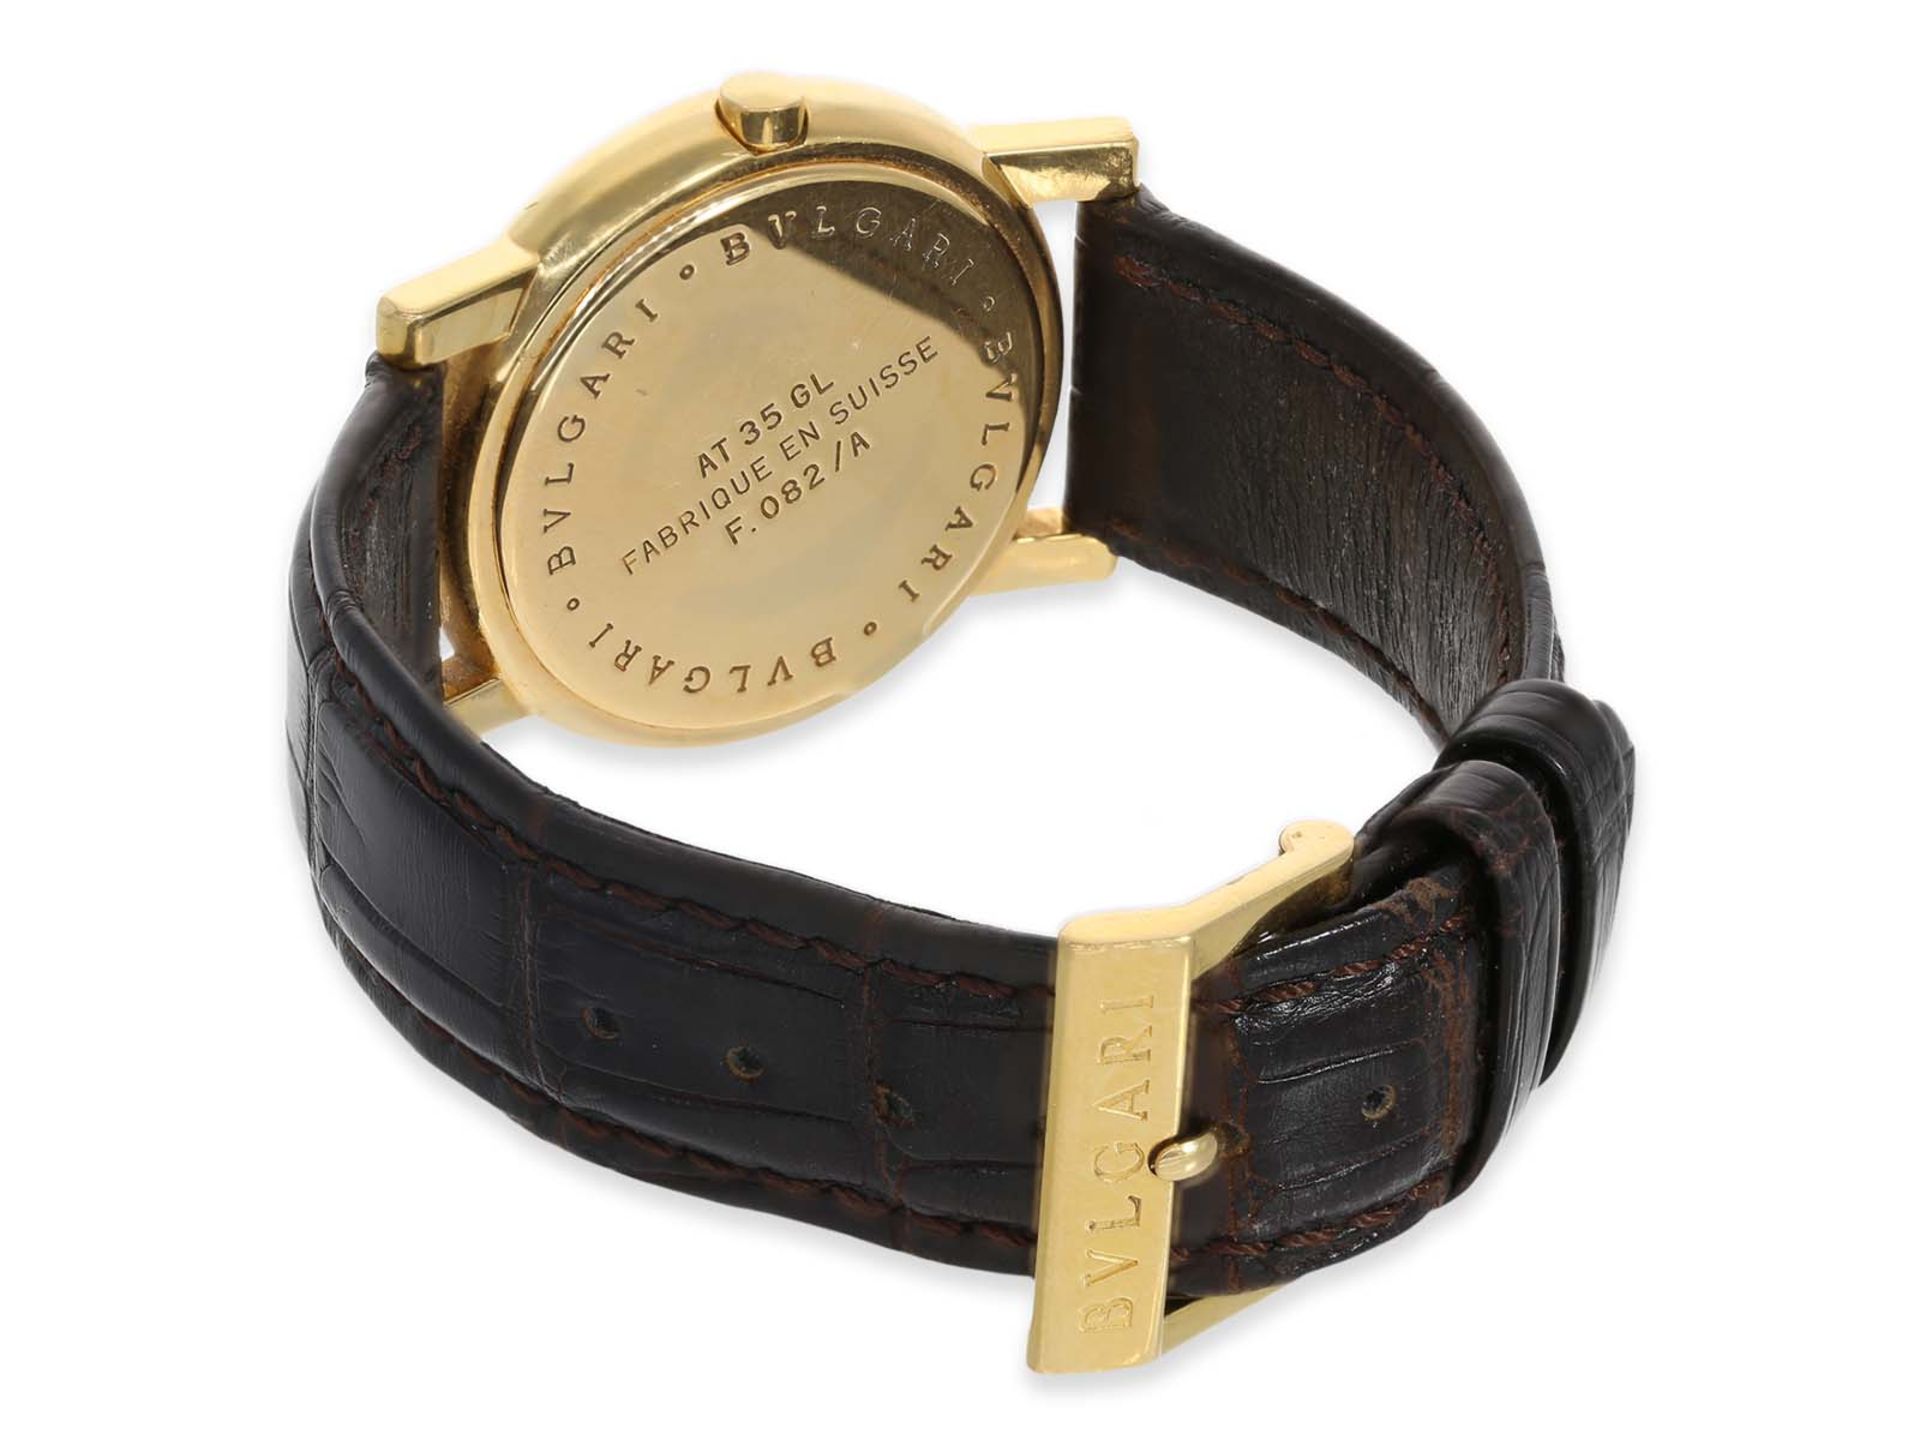 Wrist watch: luxury Bvlgari Anifiteatro 18K gold, reference AT 35GL - Image 3 of 4